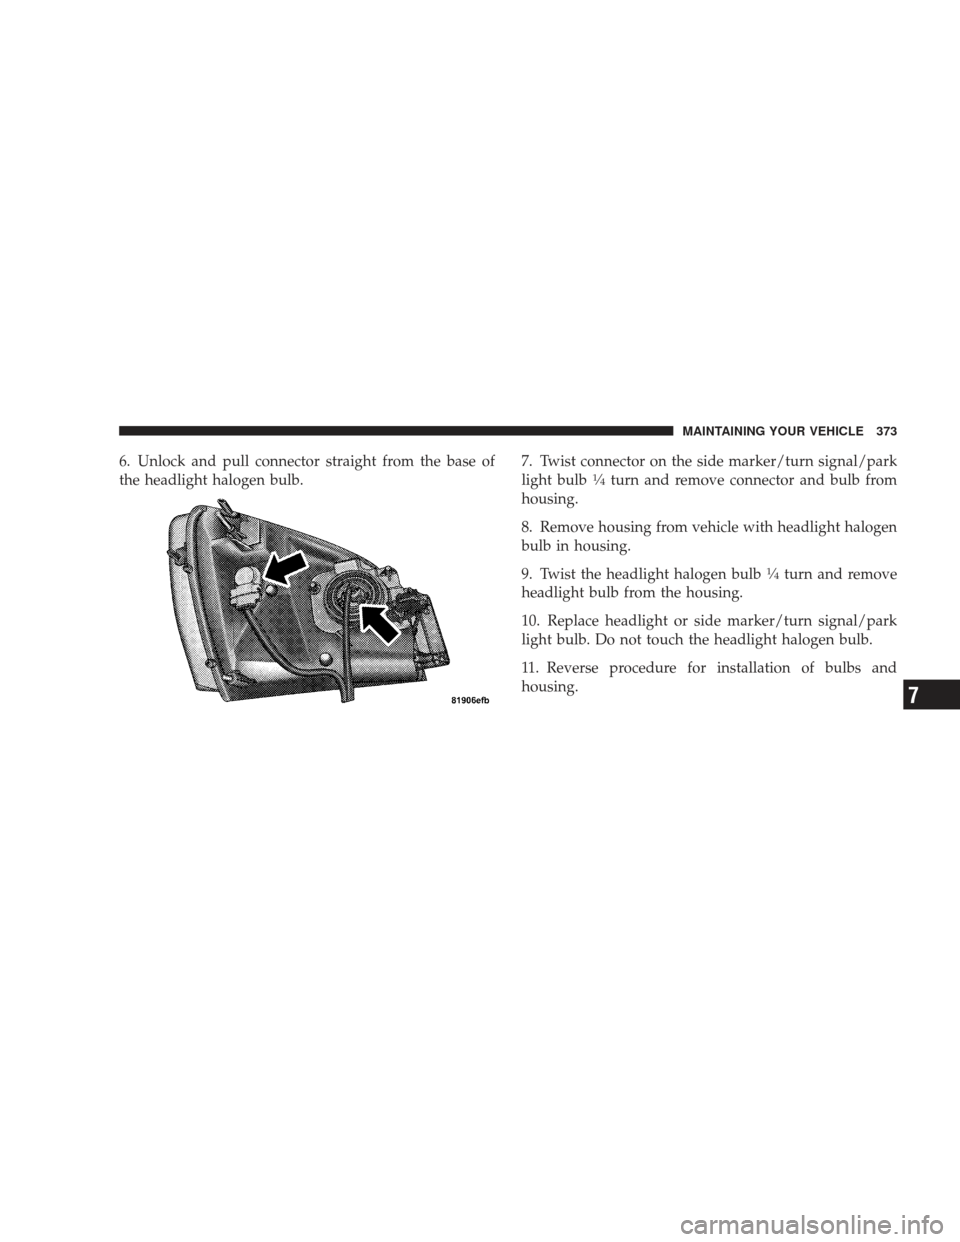 DODGE RAM 4500 CHASSIS CAB 2009 4.G Owners Manual 6. Unlock and pull connector straight from the base of
the headlight halogen bulb.7. Twist connector on the side marker/turn signal/park
light bulb1�4turn and remove connector and bulb from
housing.
8